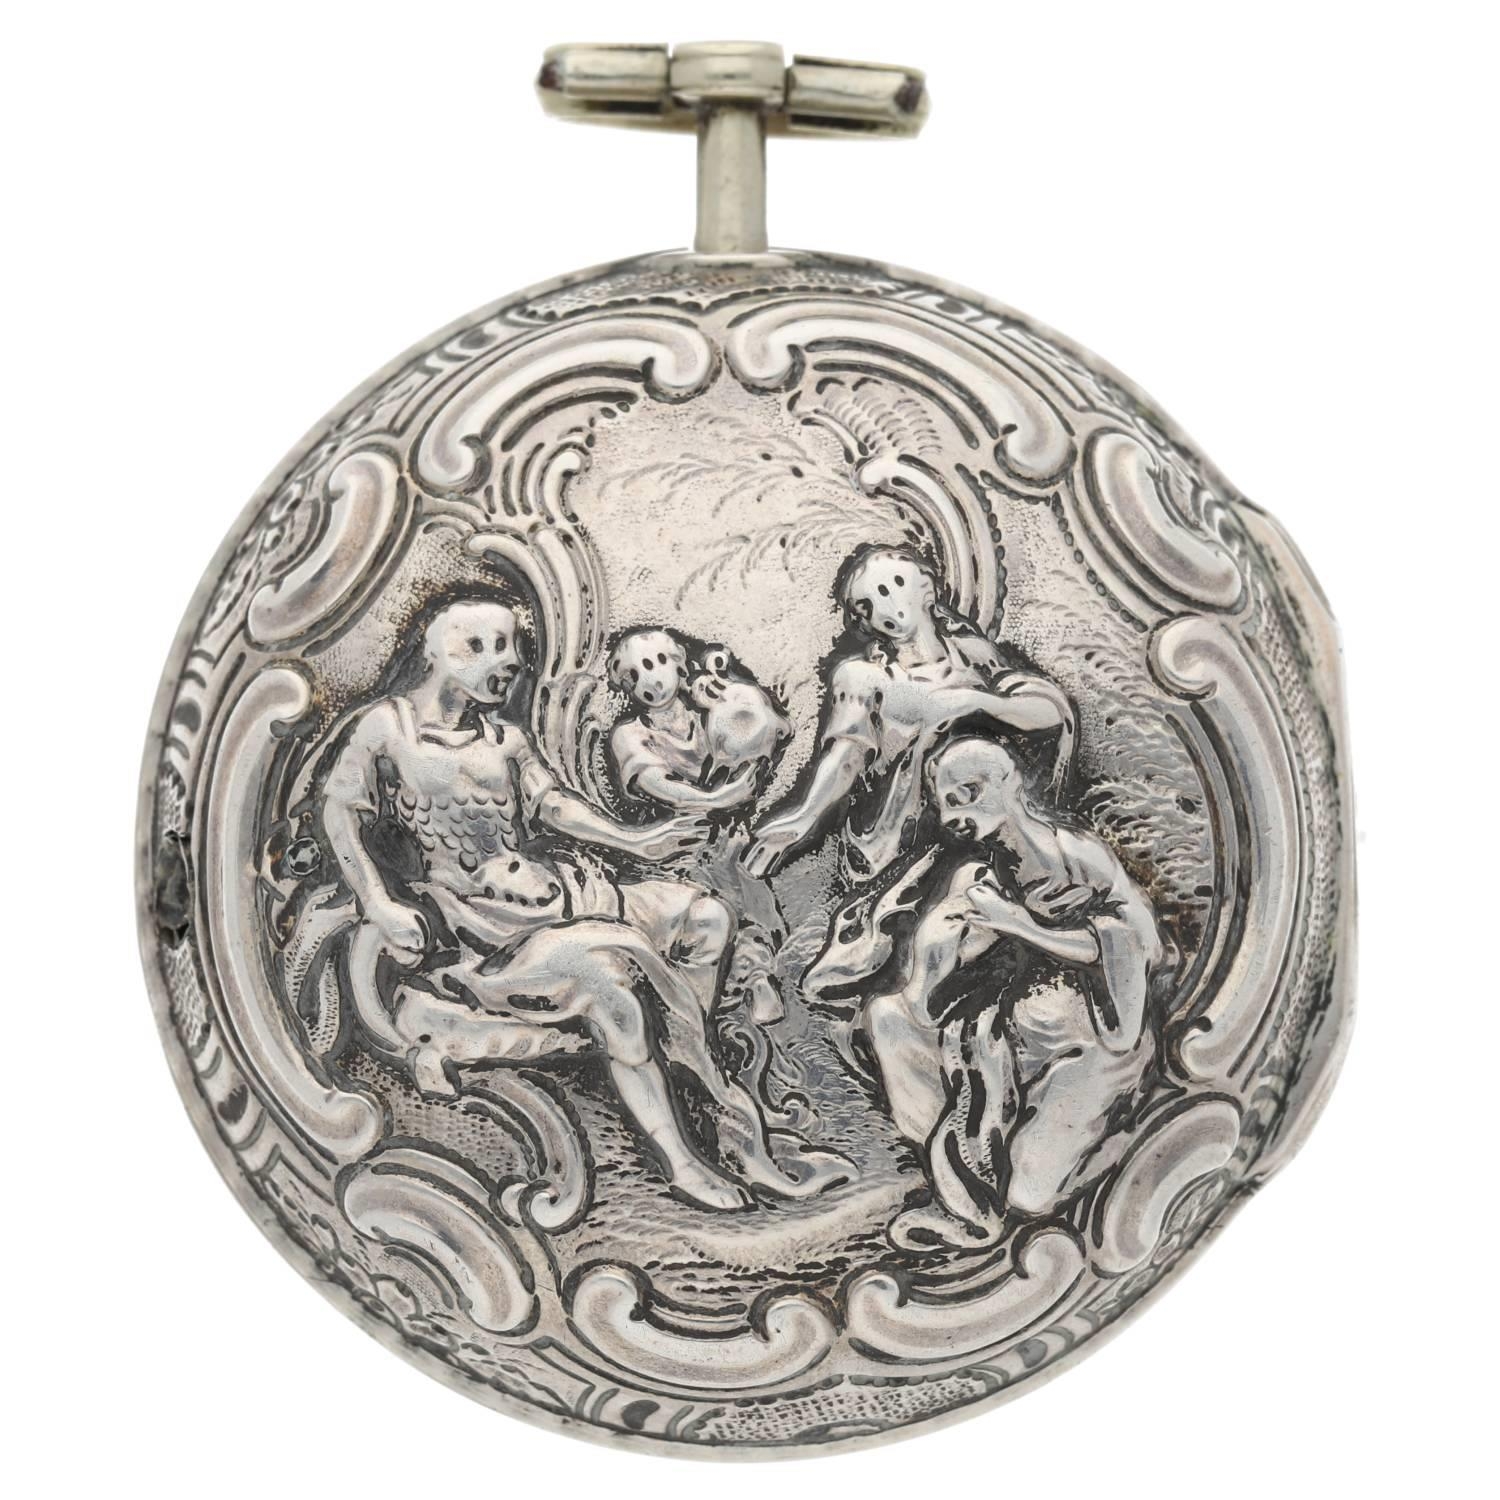 Samson, London - George III English silver repoussé pair cased verge pocket watch, London 1785, - Image 8 of 10